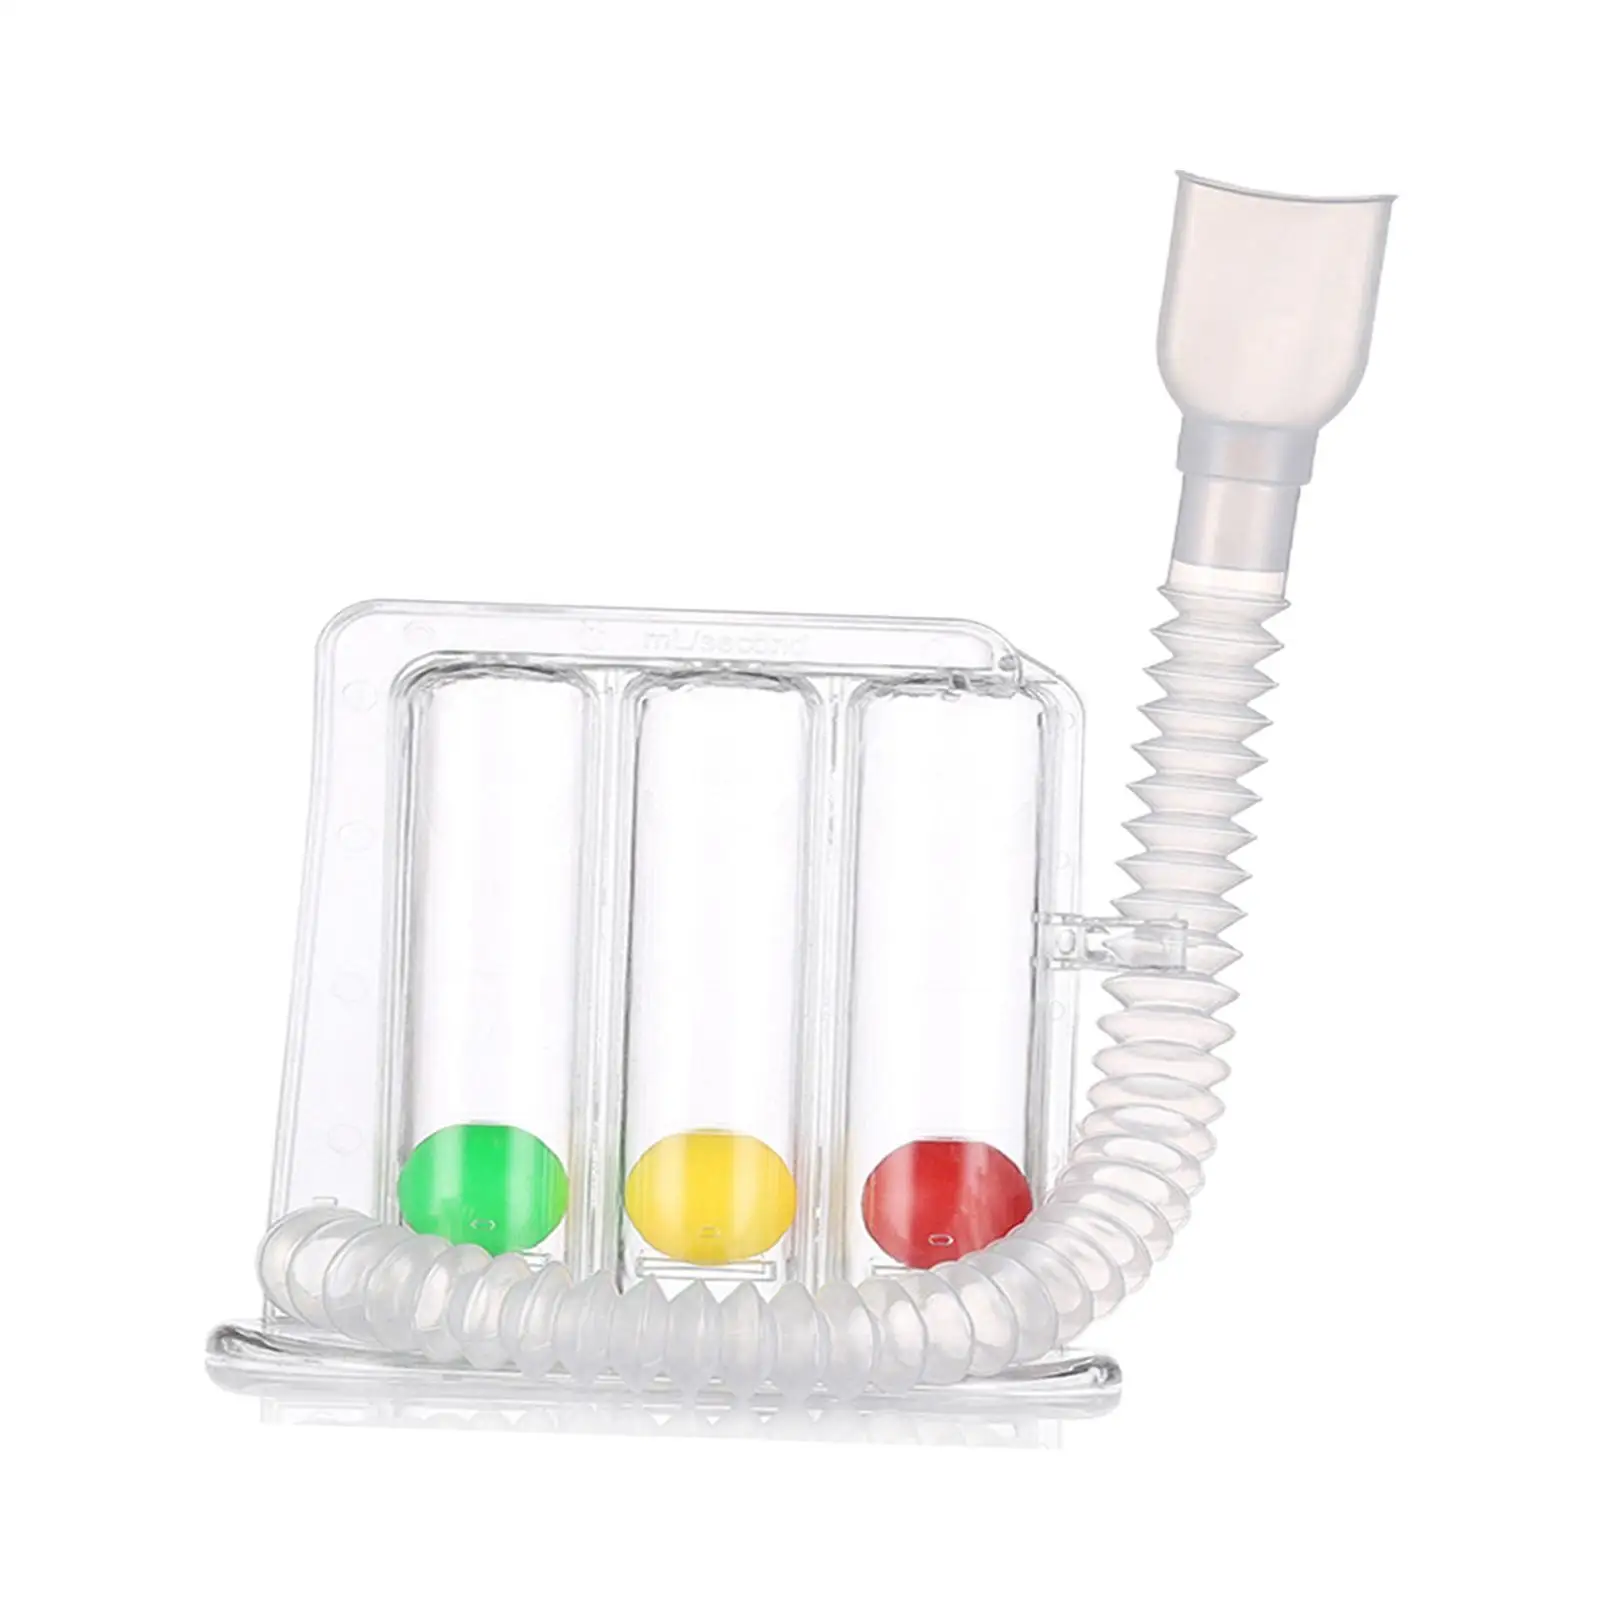 Deep Breathing Lung Exerciser Professional Breathing Trainer Respiratory Spirometry Lung Exerciser